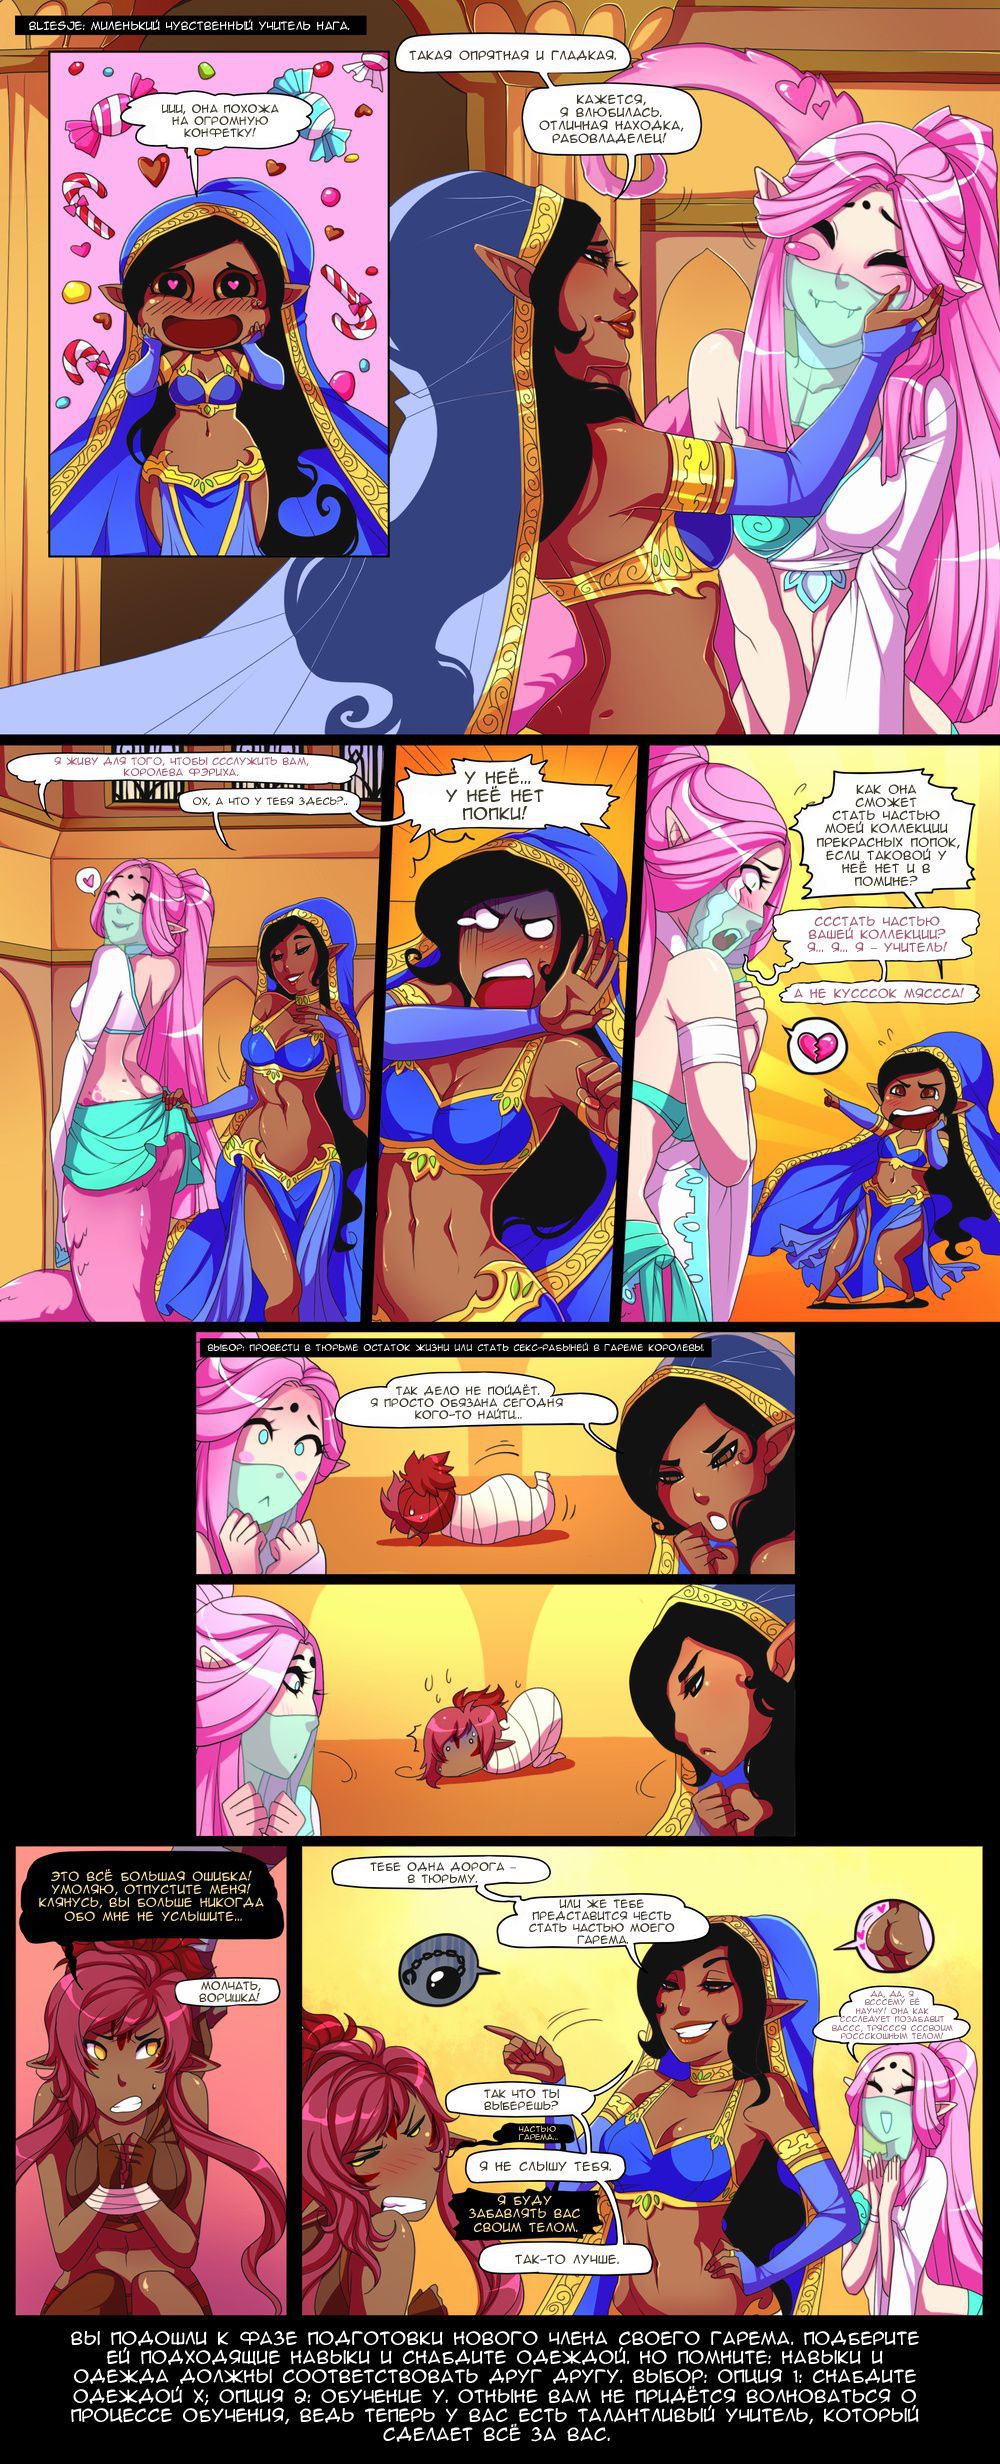 [Lunareth] Queen of Butts [Russian] (Ongoing) 4